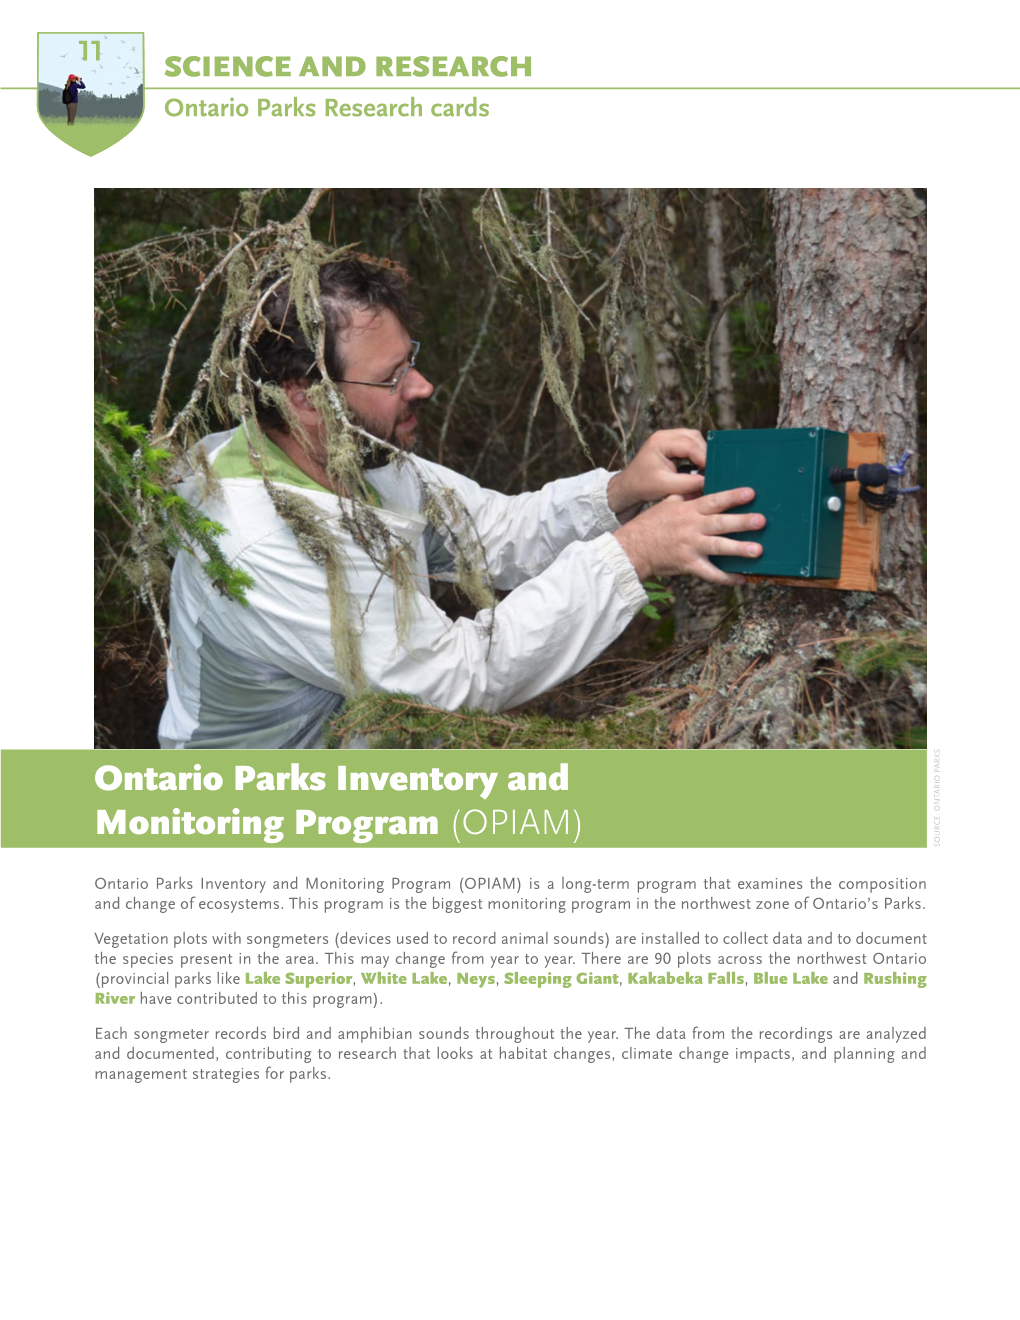 Ontario Parks Inventory and Monitoring Program